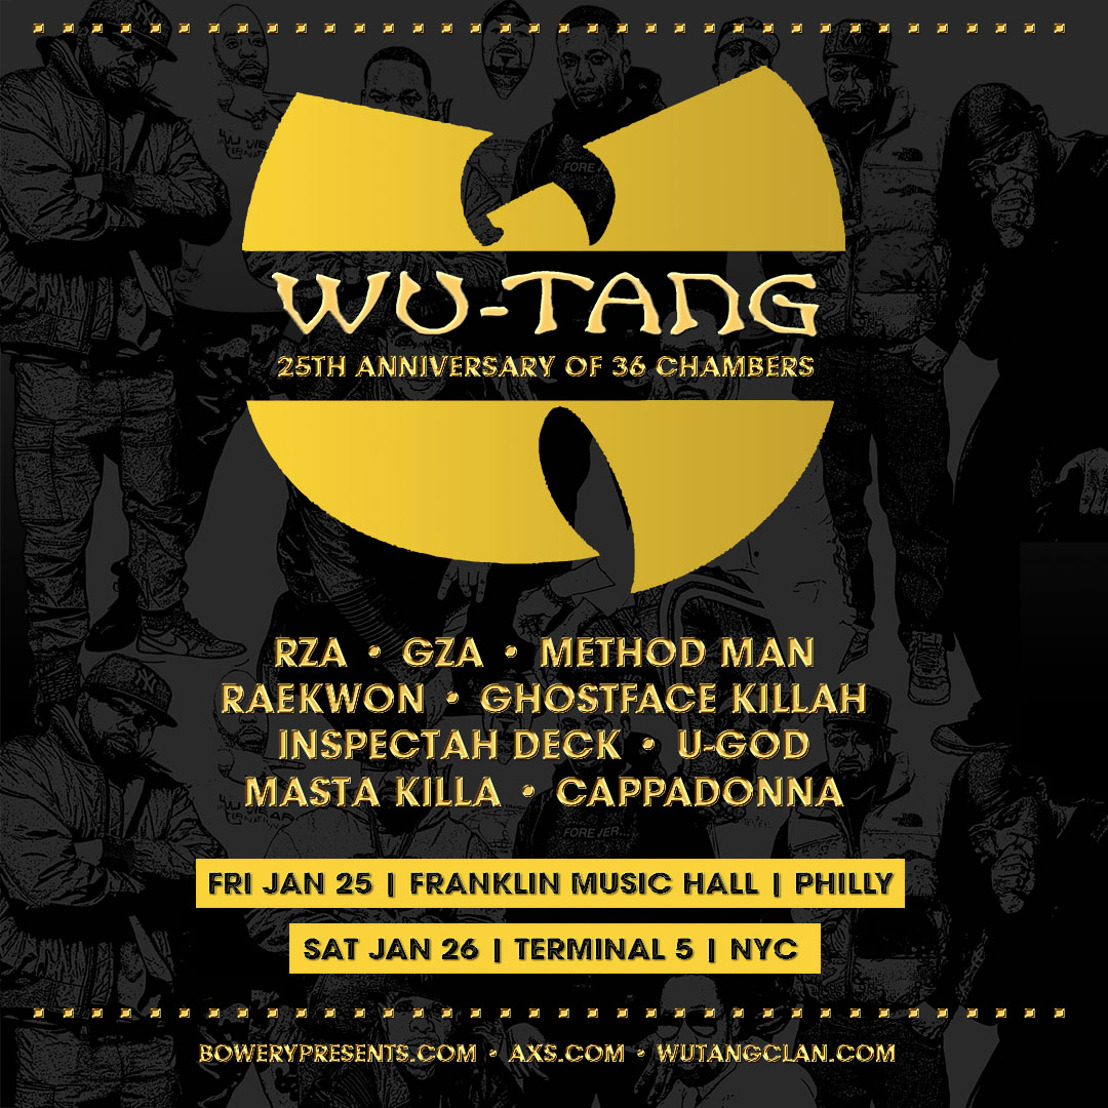 Wu-Tang Clan Announce 2 Shows in Philadelphia & New York City in January 2019